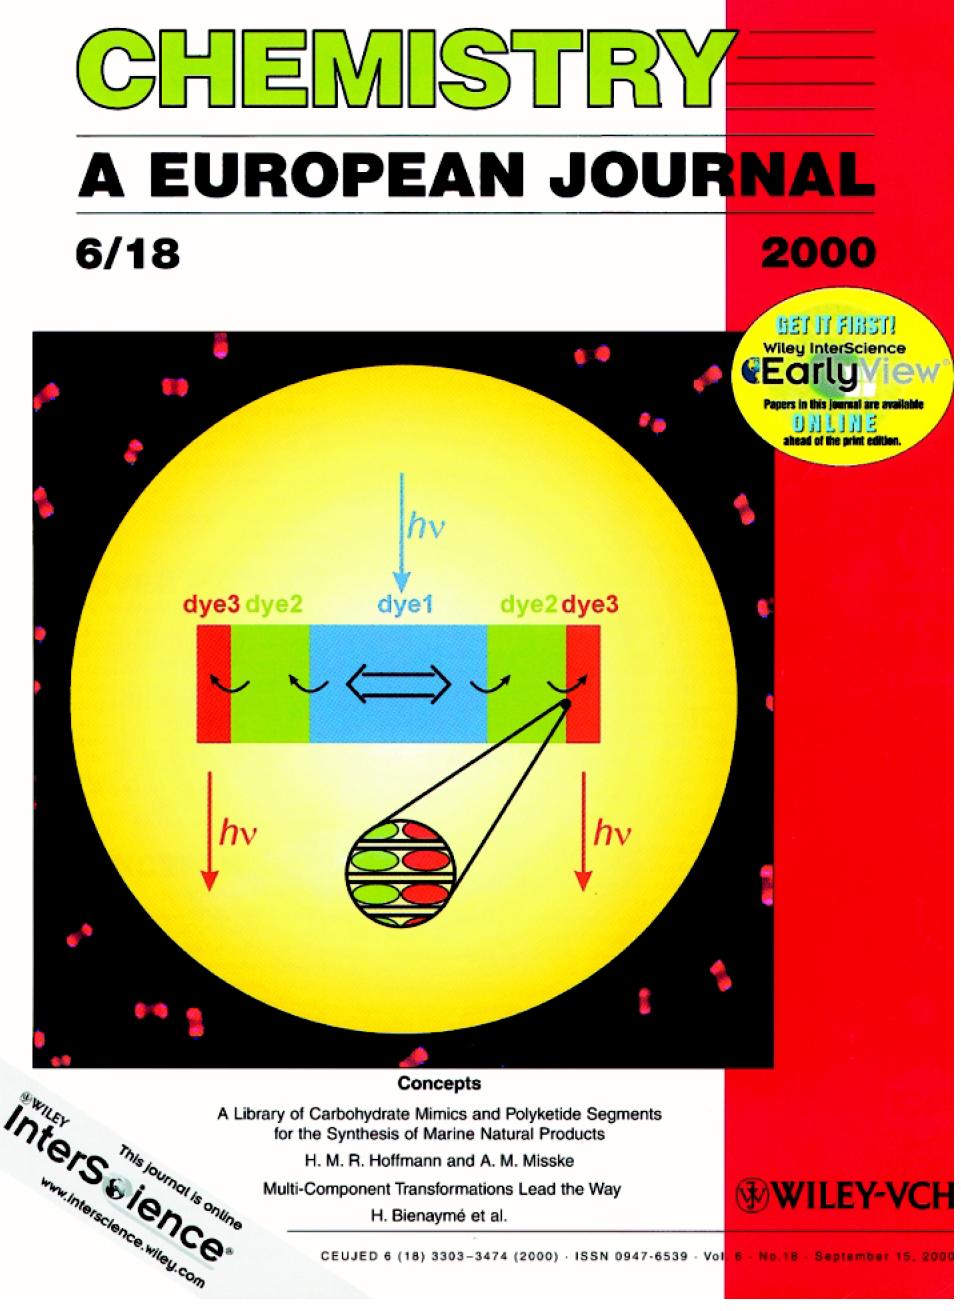 Dye-Loaded Zeolite L Sandwiches as Artificial Antenna Systems for Light Transport
	Marc Pauchard, Andr Devaux and Gion Calzaferri
	Chemistry, a European Journal 6 (2000) 3456 